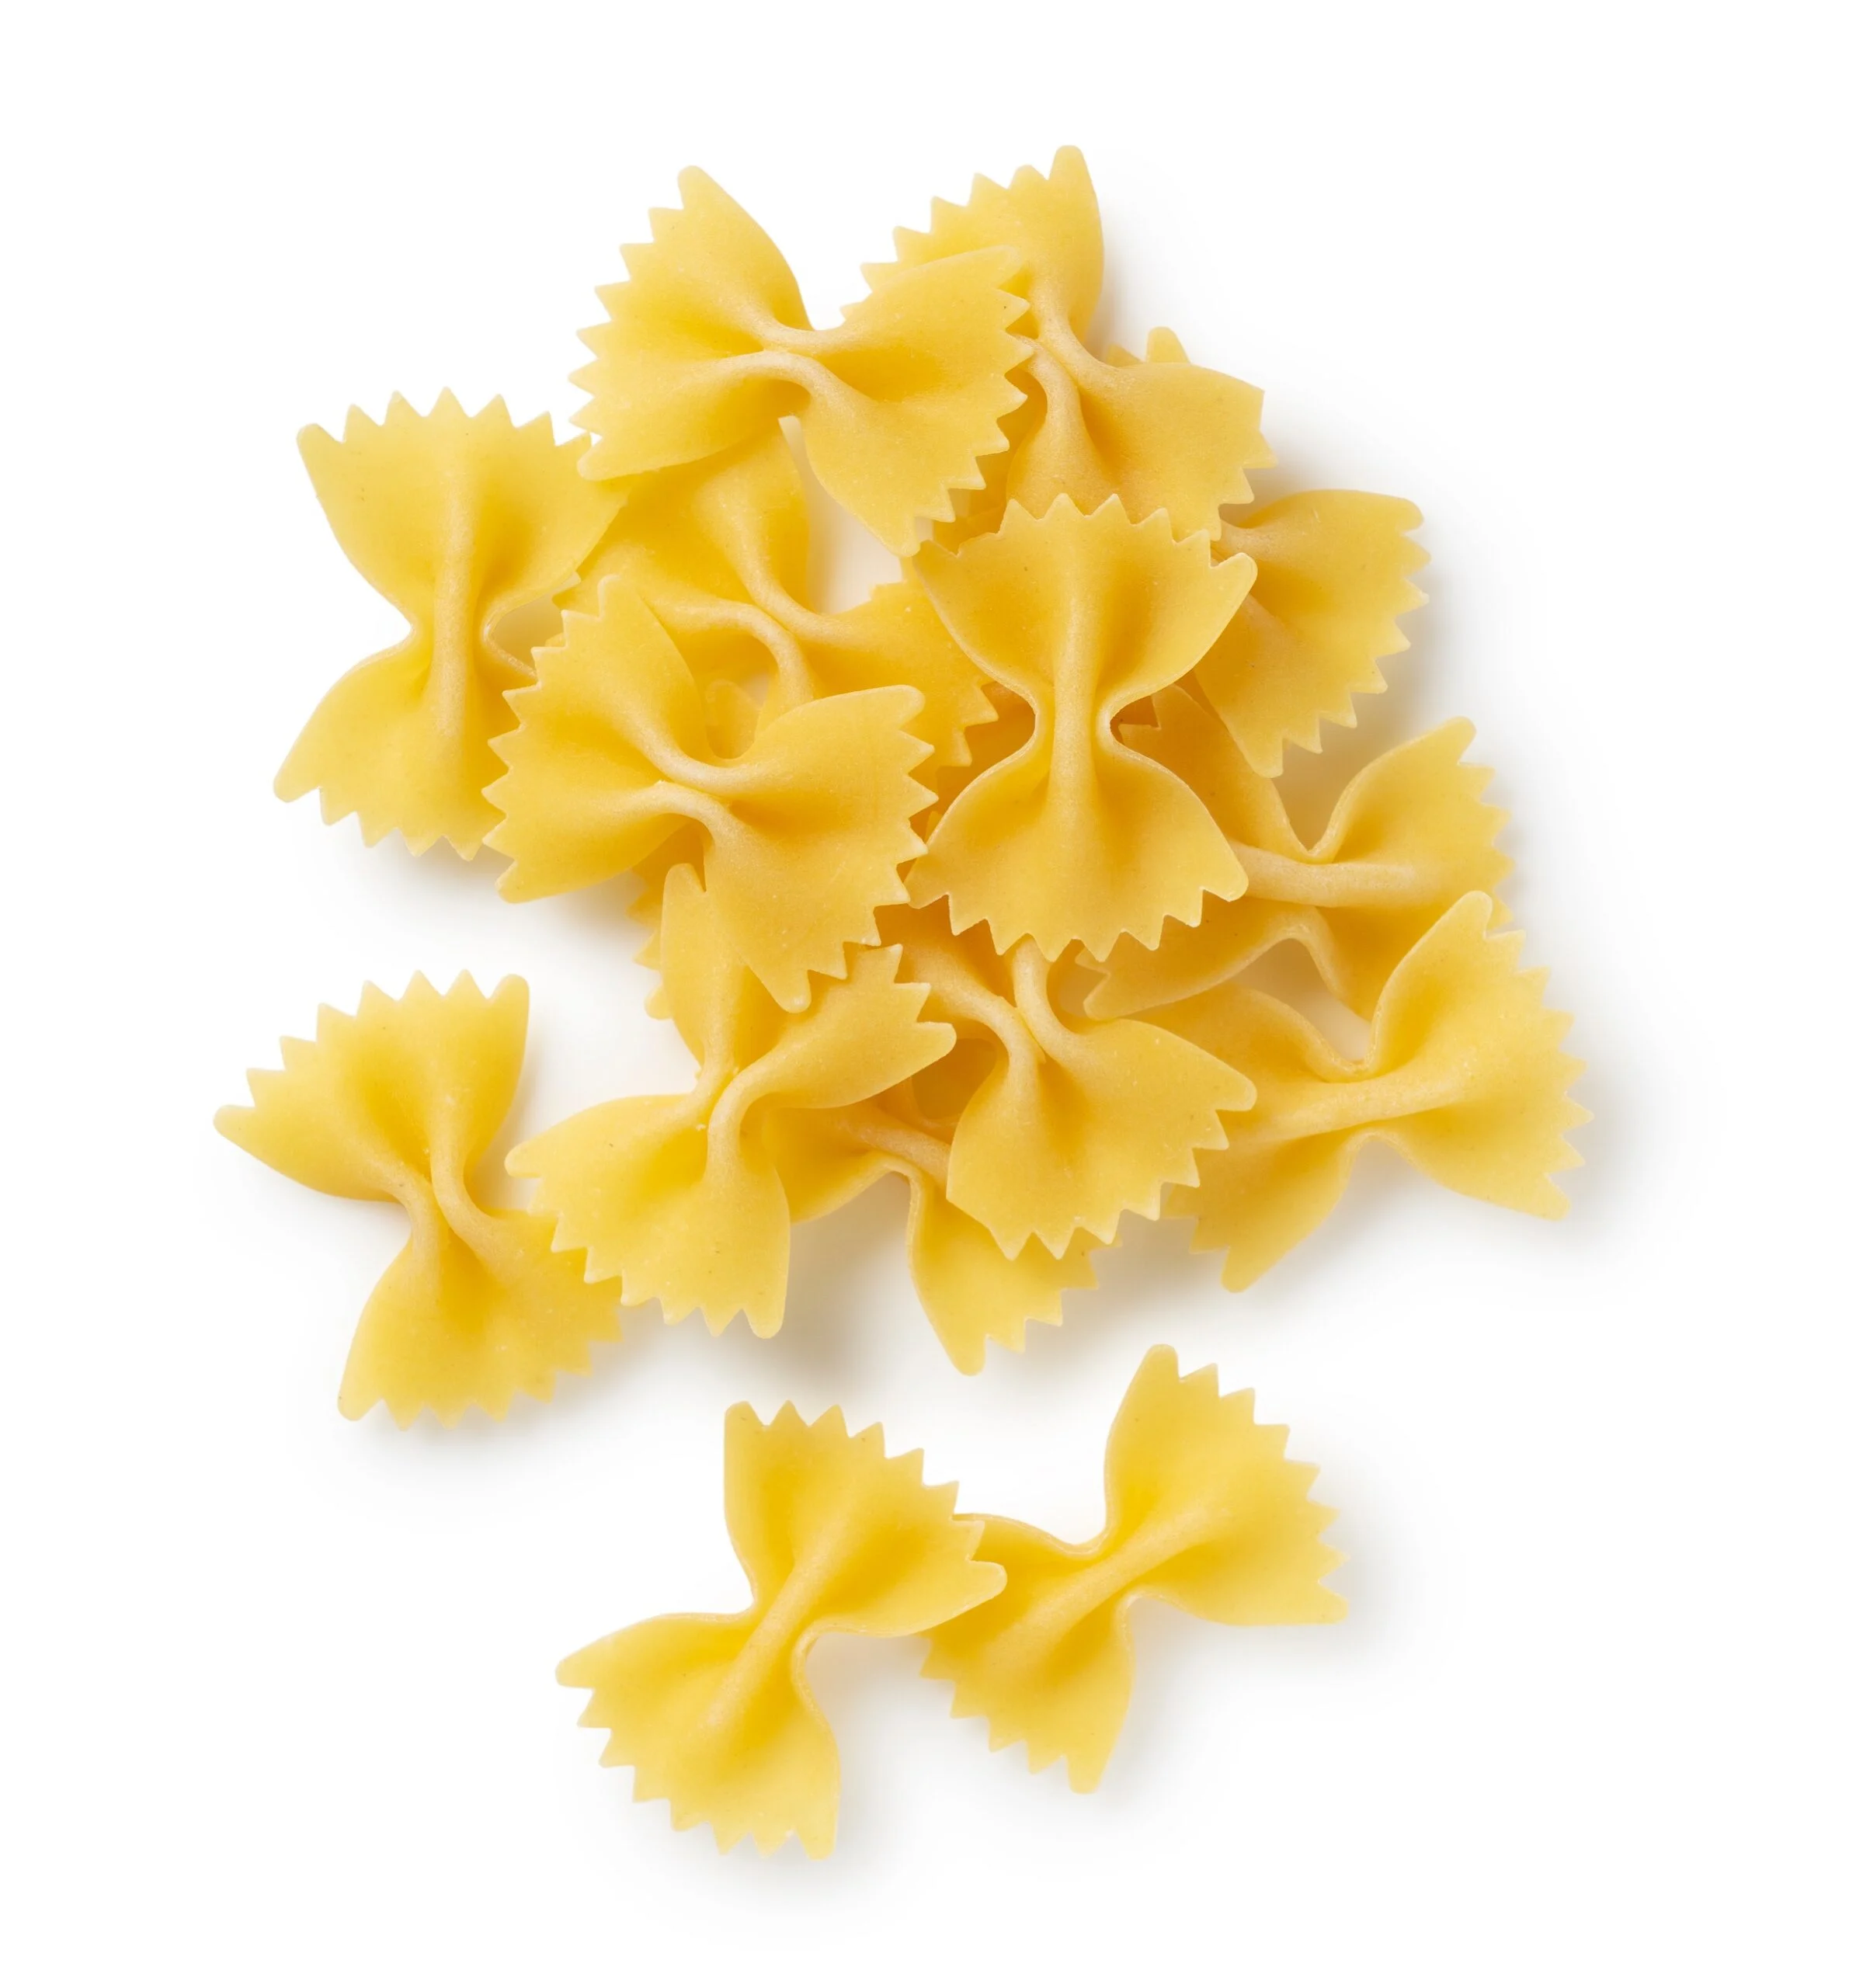 Farfalle,placed,on,a,white,background